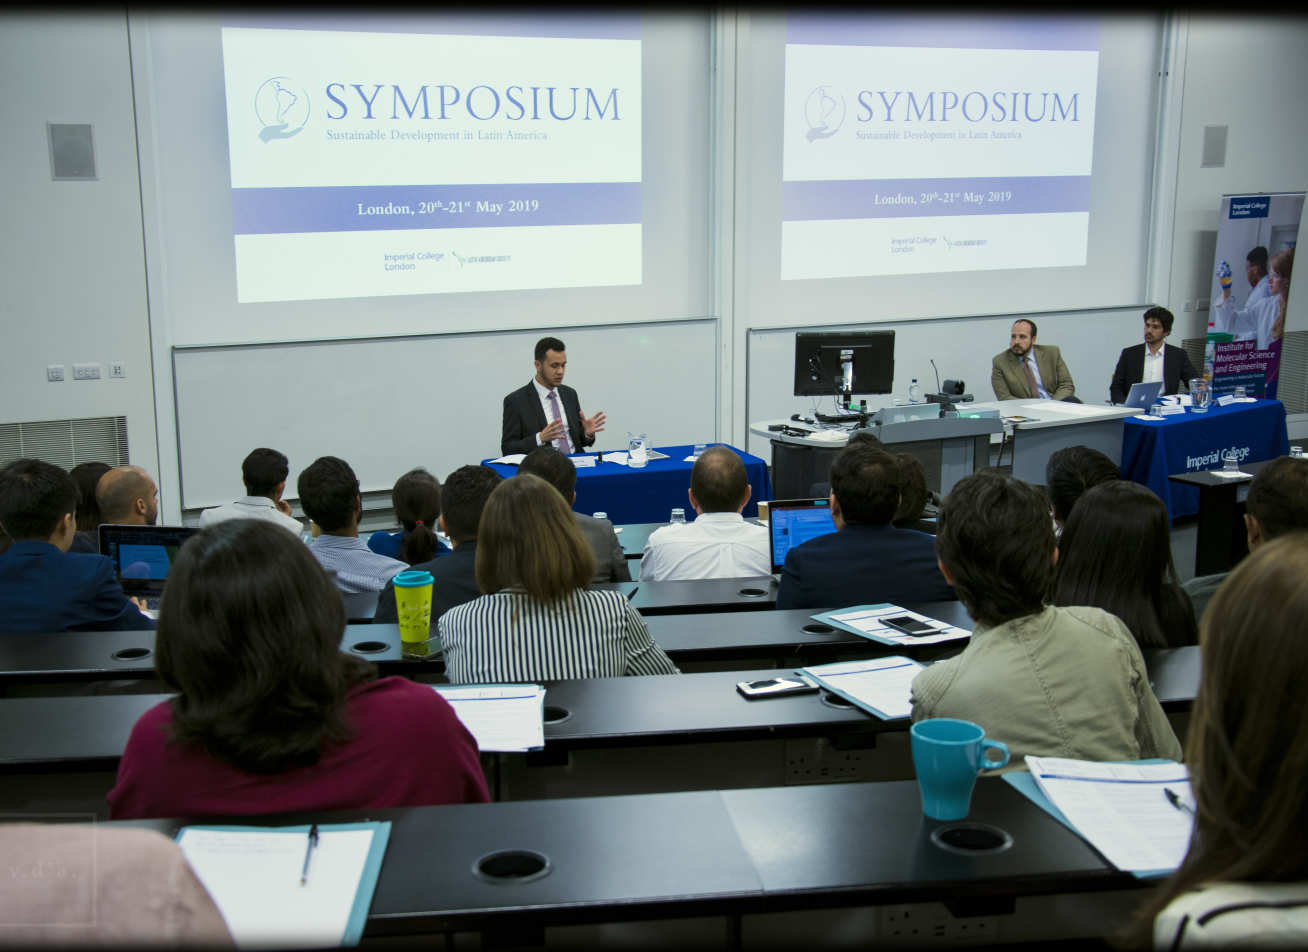 The symposium in action